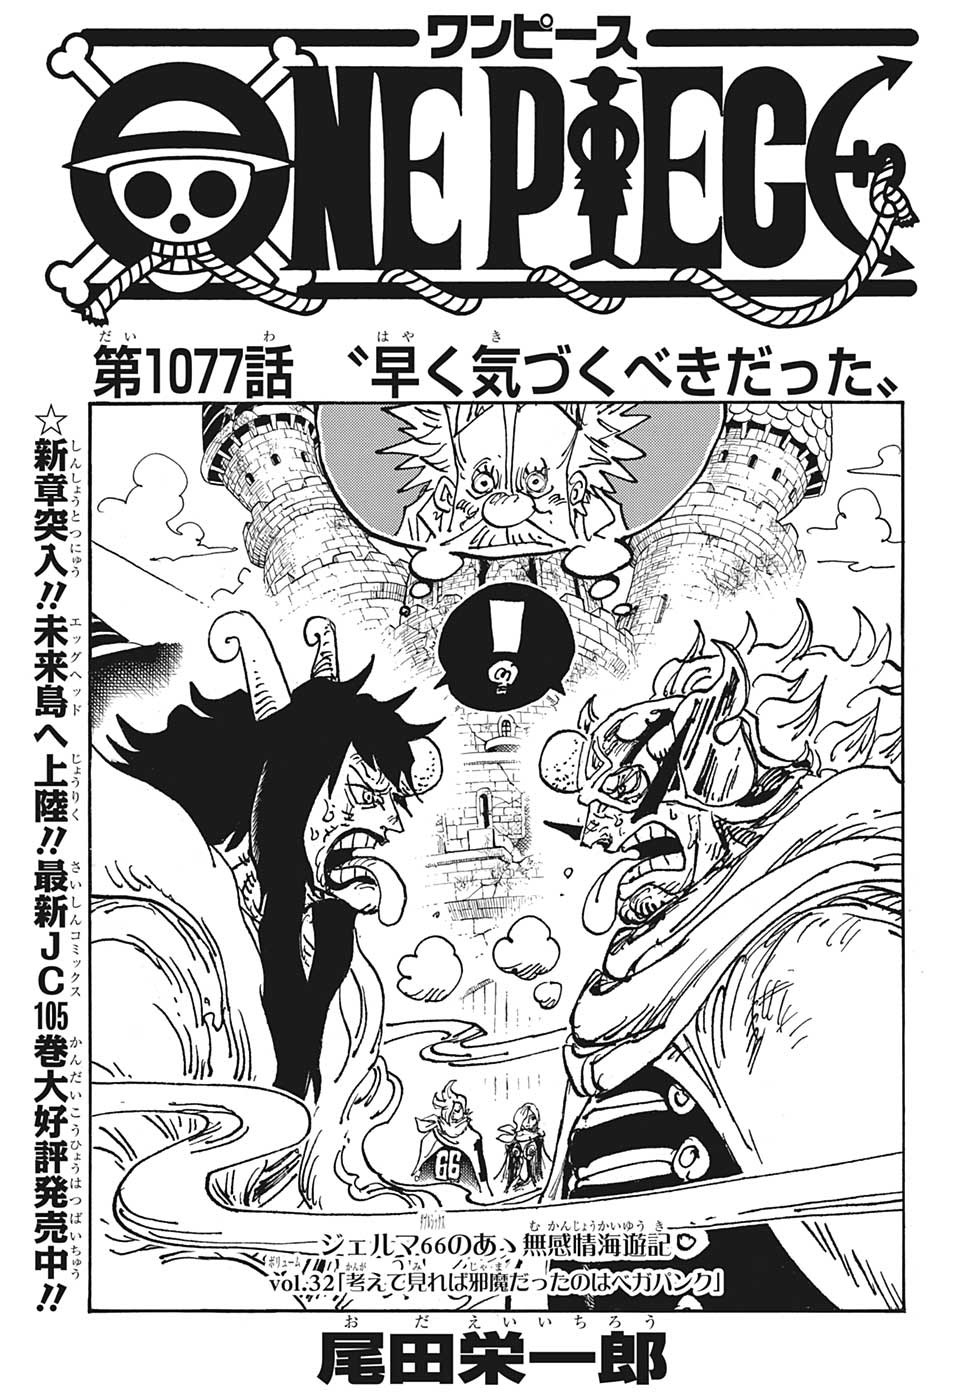 One Piece - Chapter 1077 - Page 1